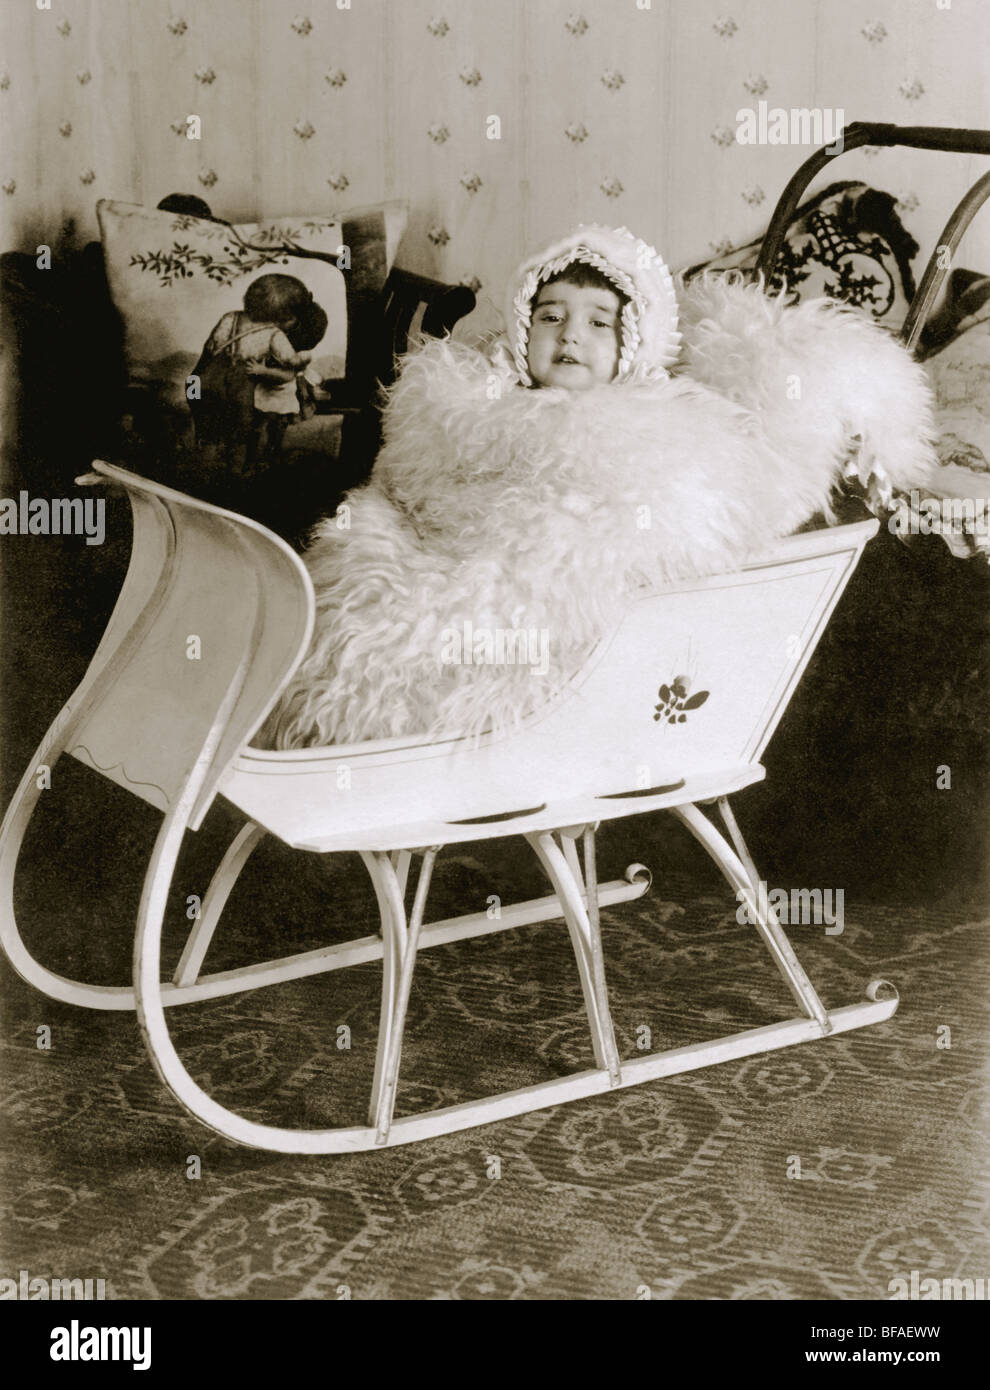 Infant Girl in Sleigh Carriage inside House Stock Photo